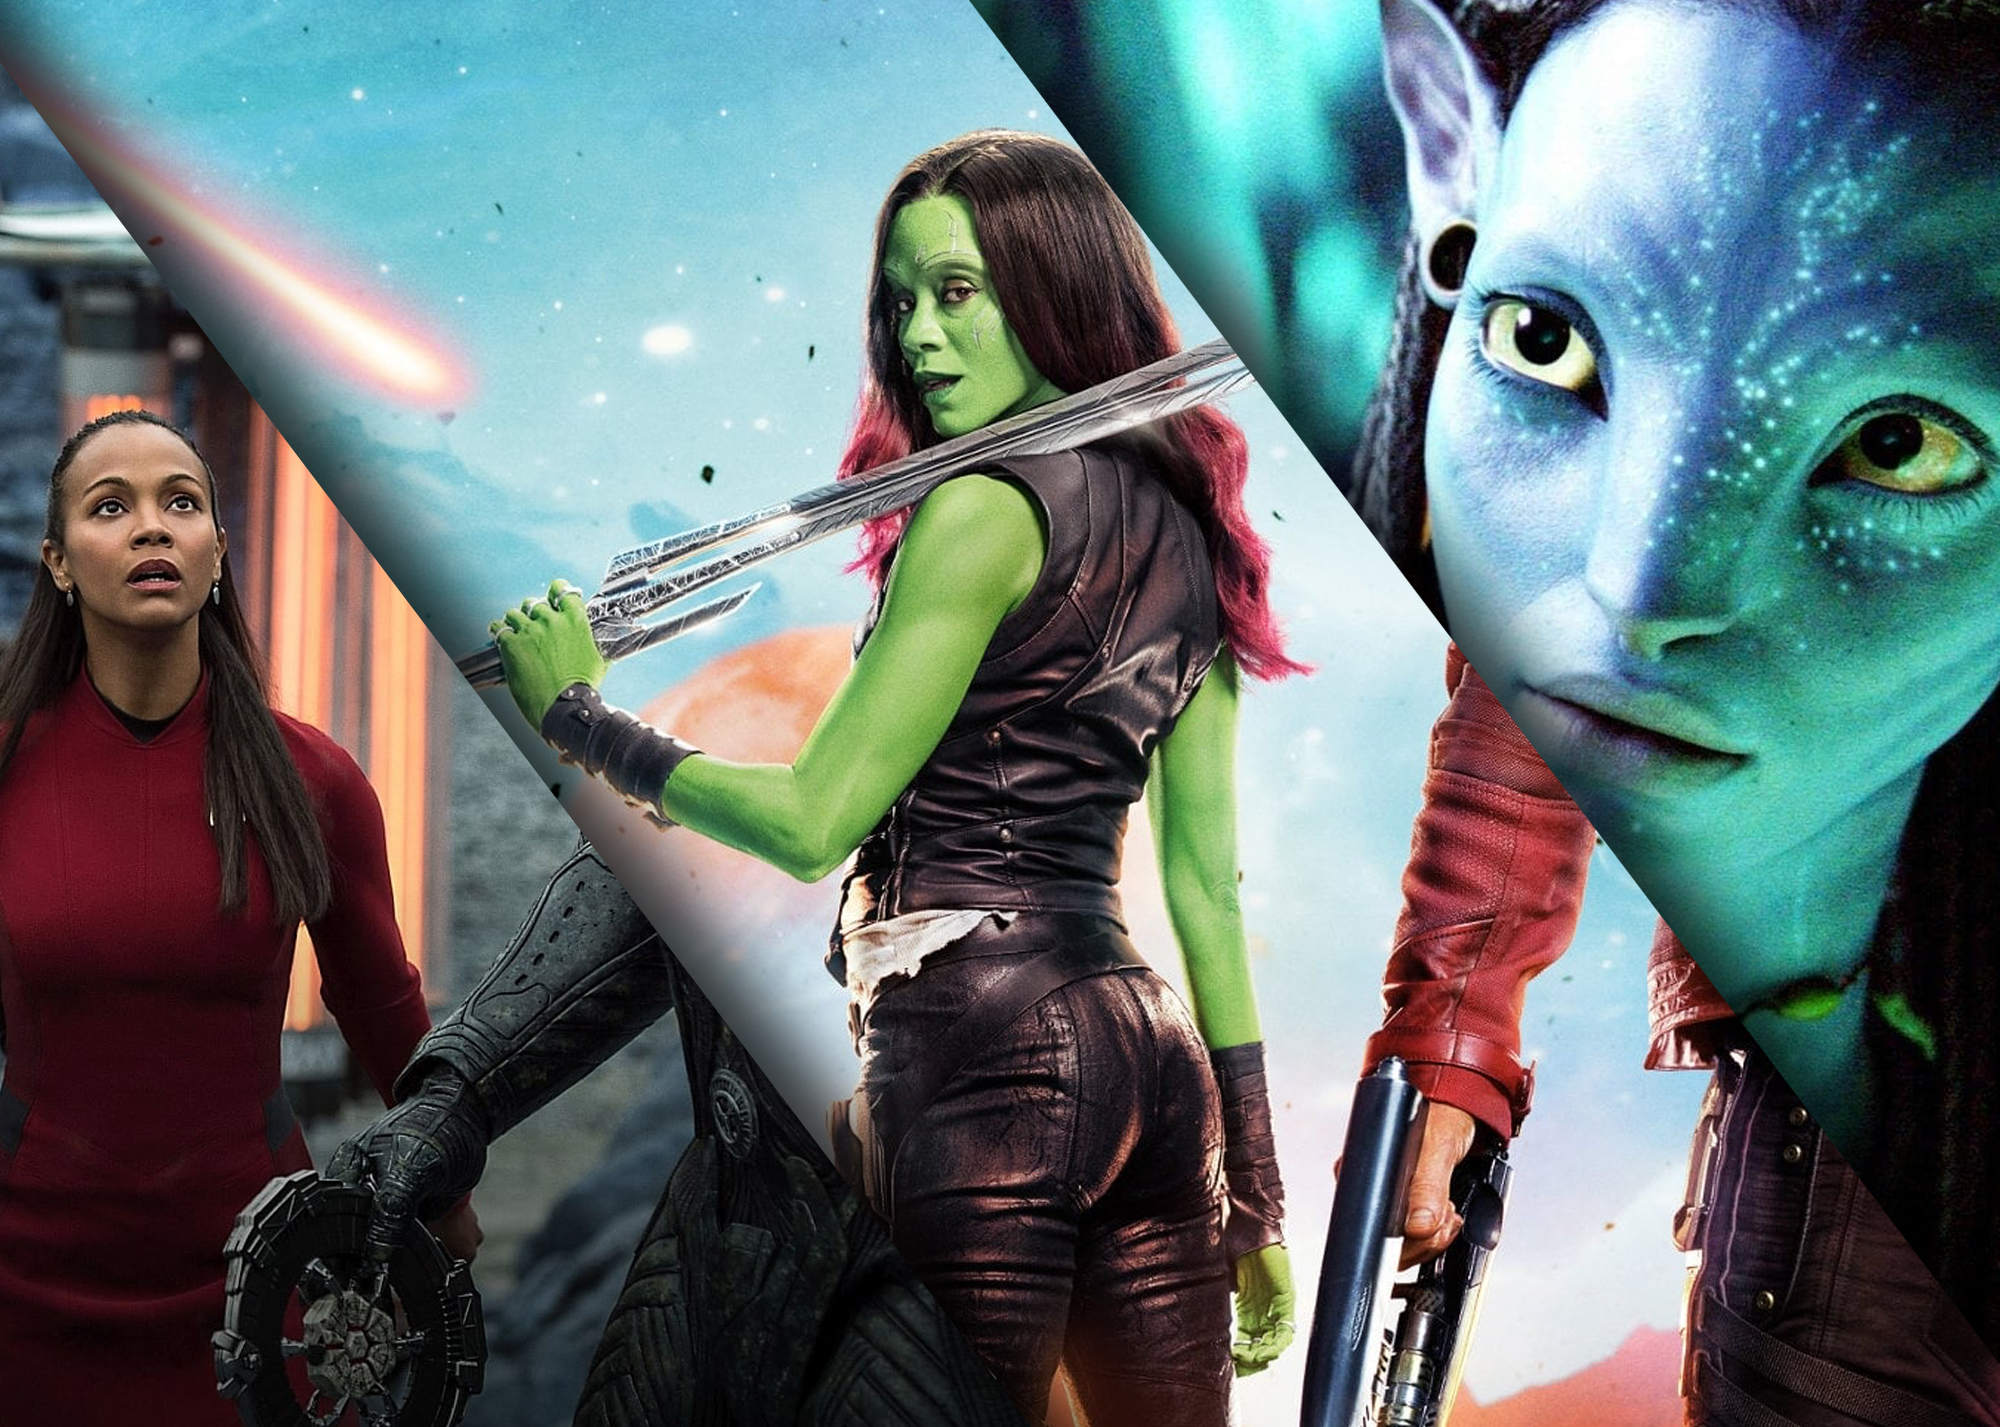 Guardians of the Galaxy Vol. 3 at an AMC Theatre near you.